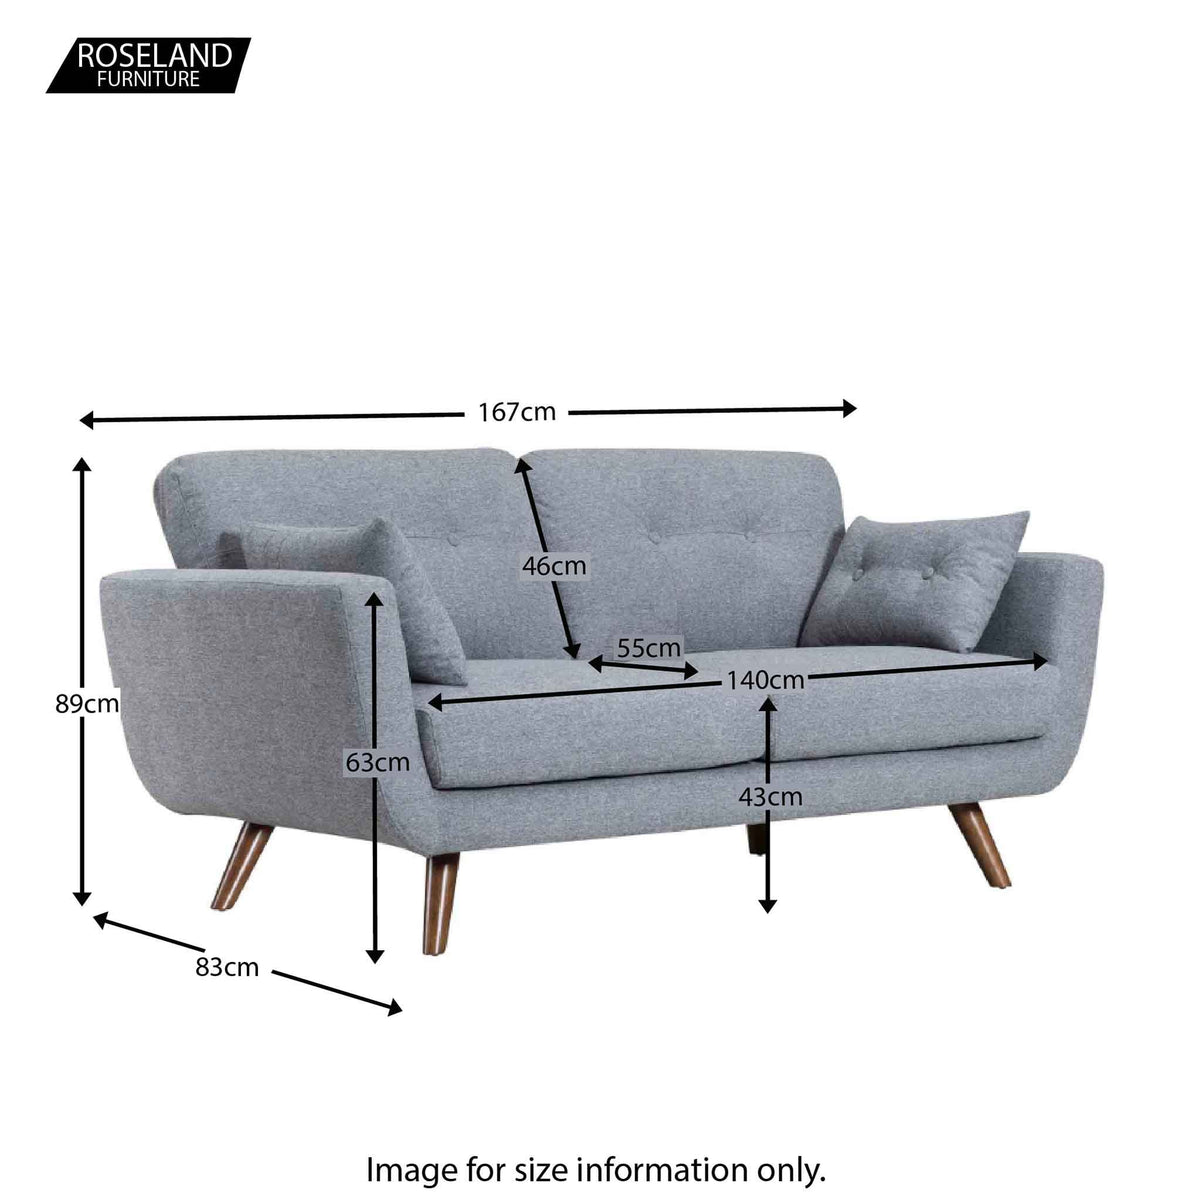 Trom Grey 2 Seater Sofa - Size Guide